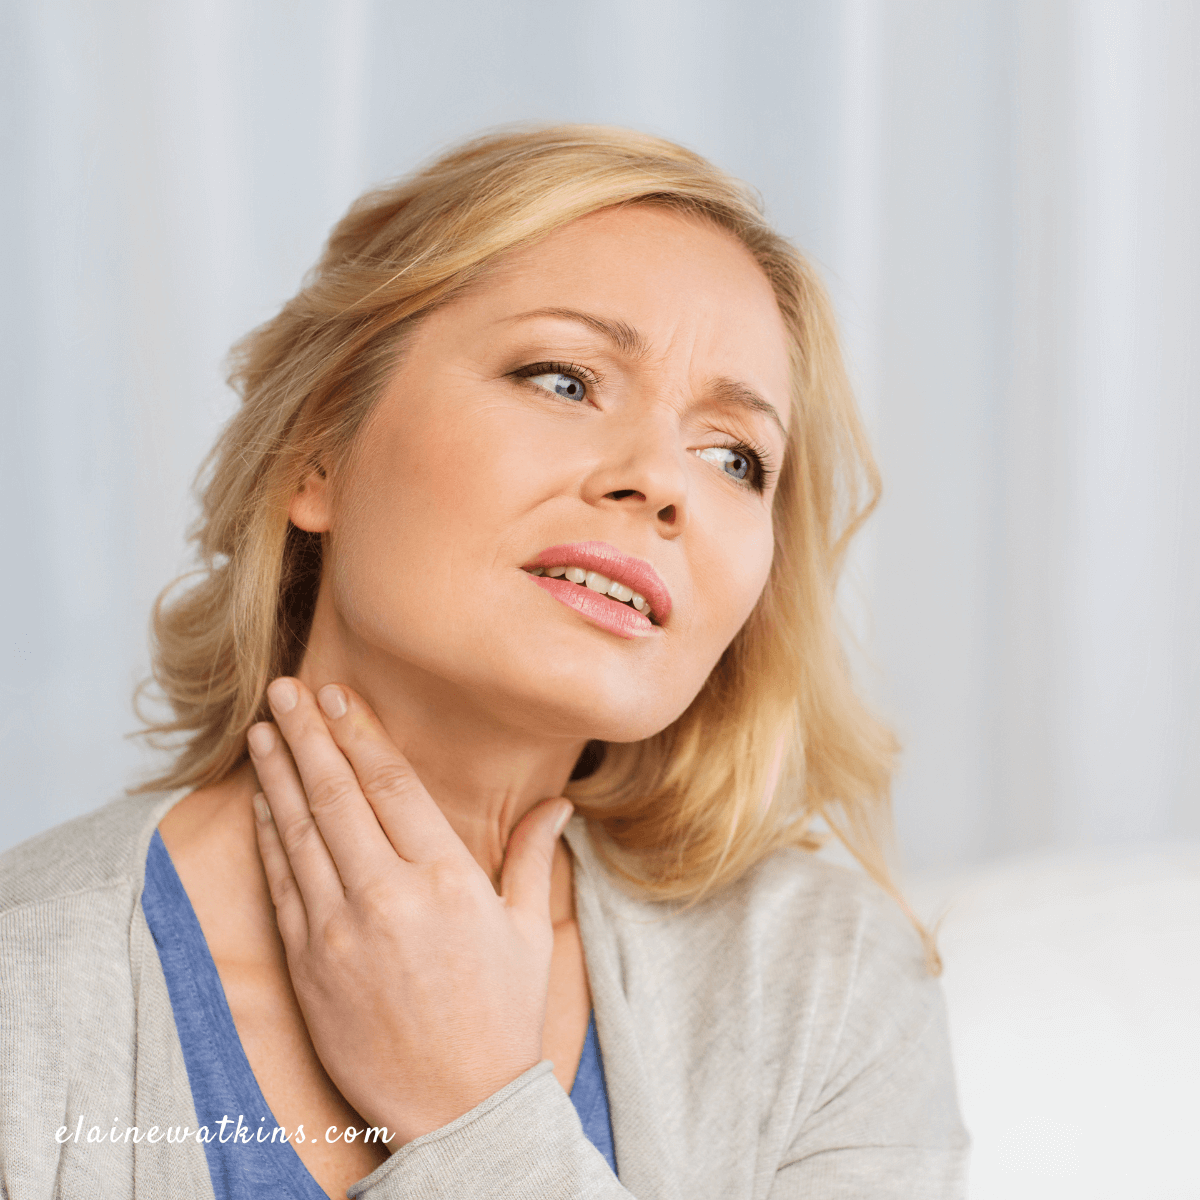 Is It Your Thyroid? Thyroid Function, Symptoms, and Testing